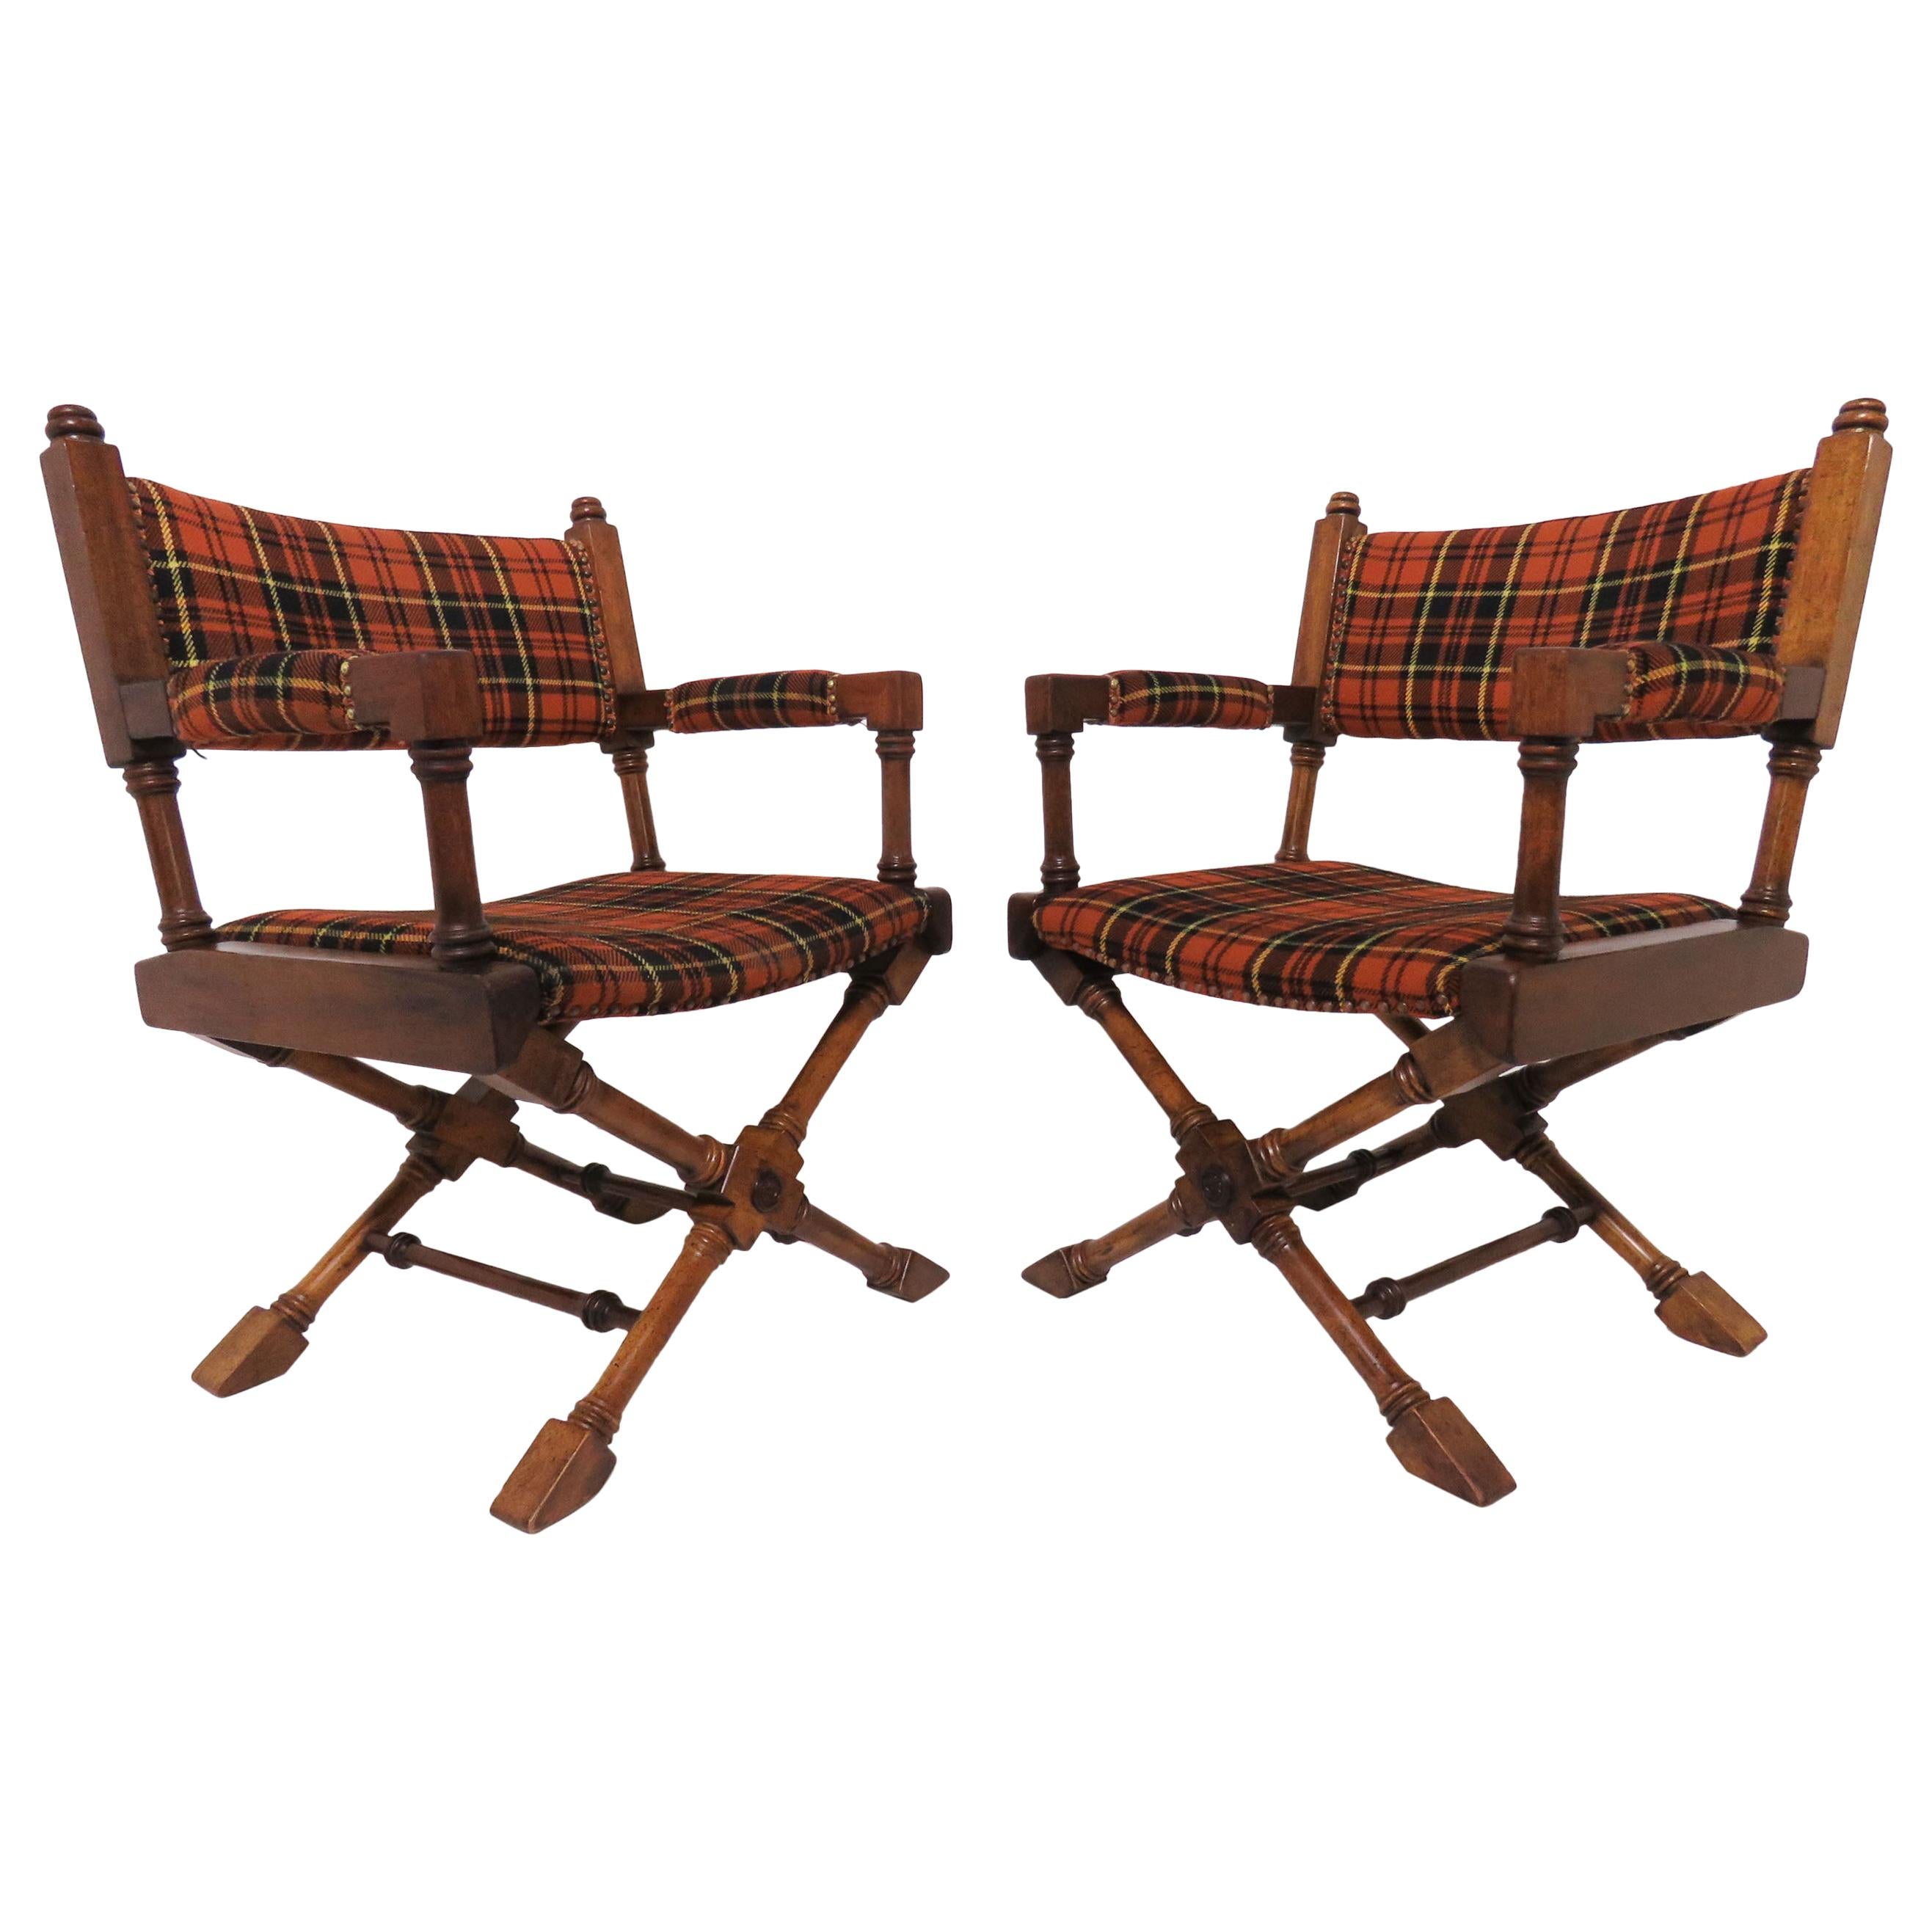 Pair of Hollywood Regency Style X-Base Campaign Chairs, circa 1960s